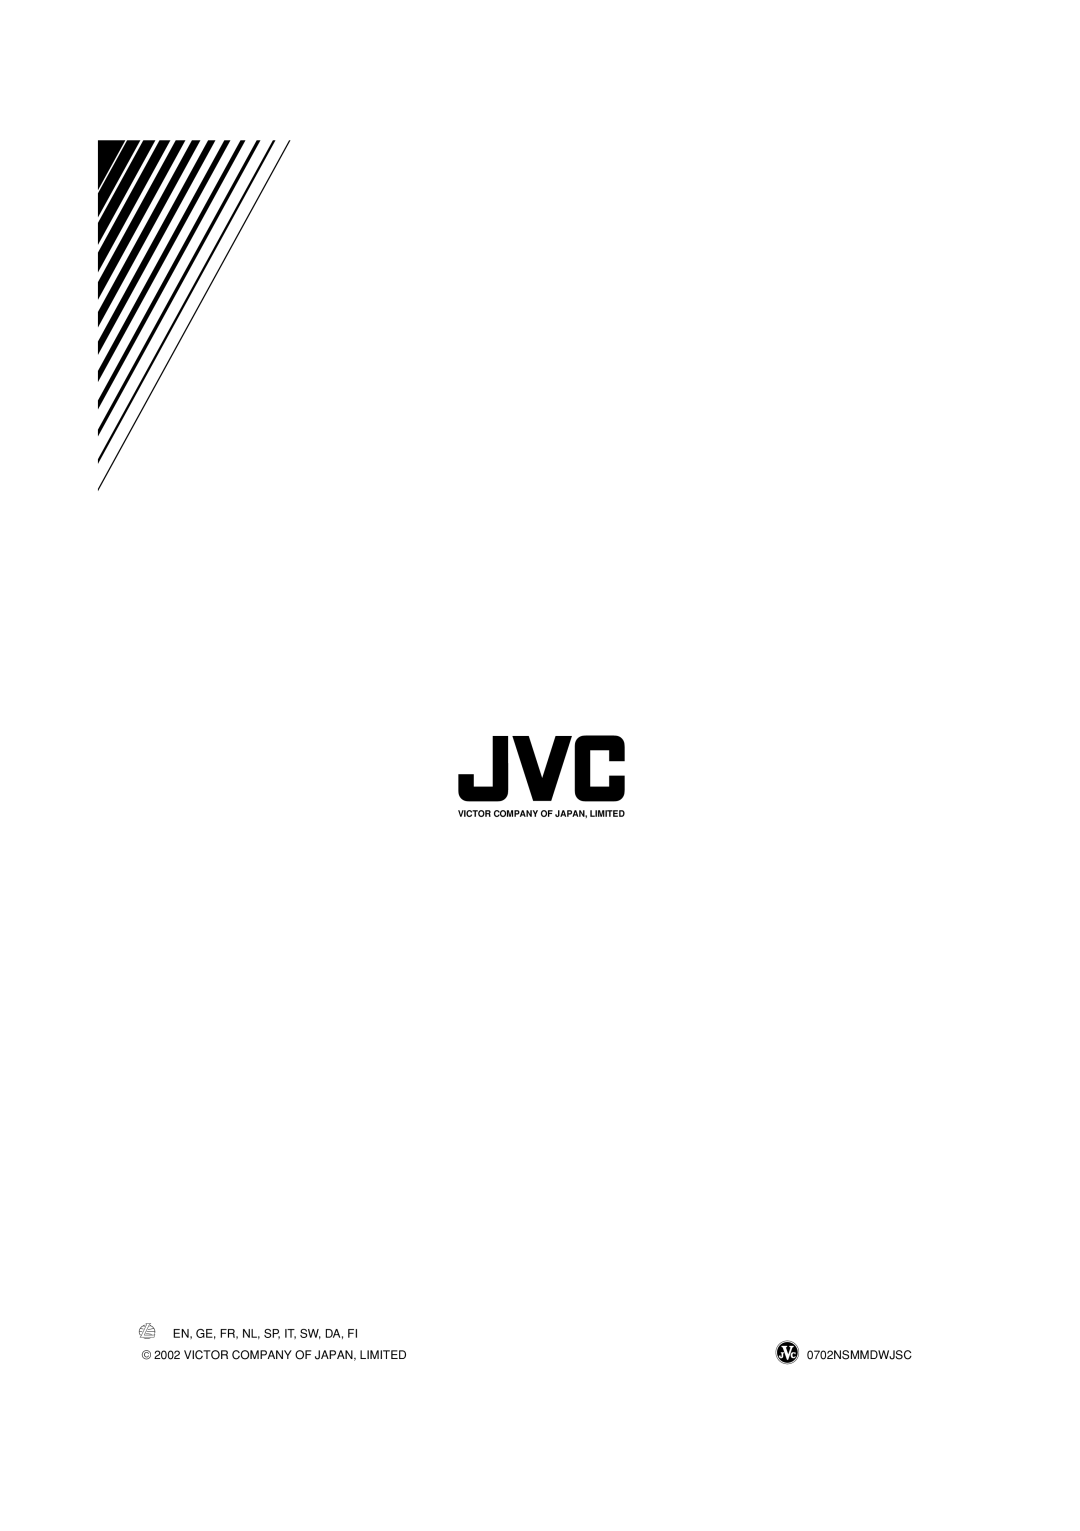 JVC SX-XDS33, SX-XDC33 manual En, Ge, Fr, Nl, Sp, It, Sw, Da, Fi, Victor Company Of Japan, Limited, 0702NSMMDWJSC 